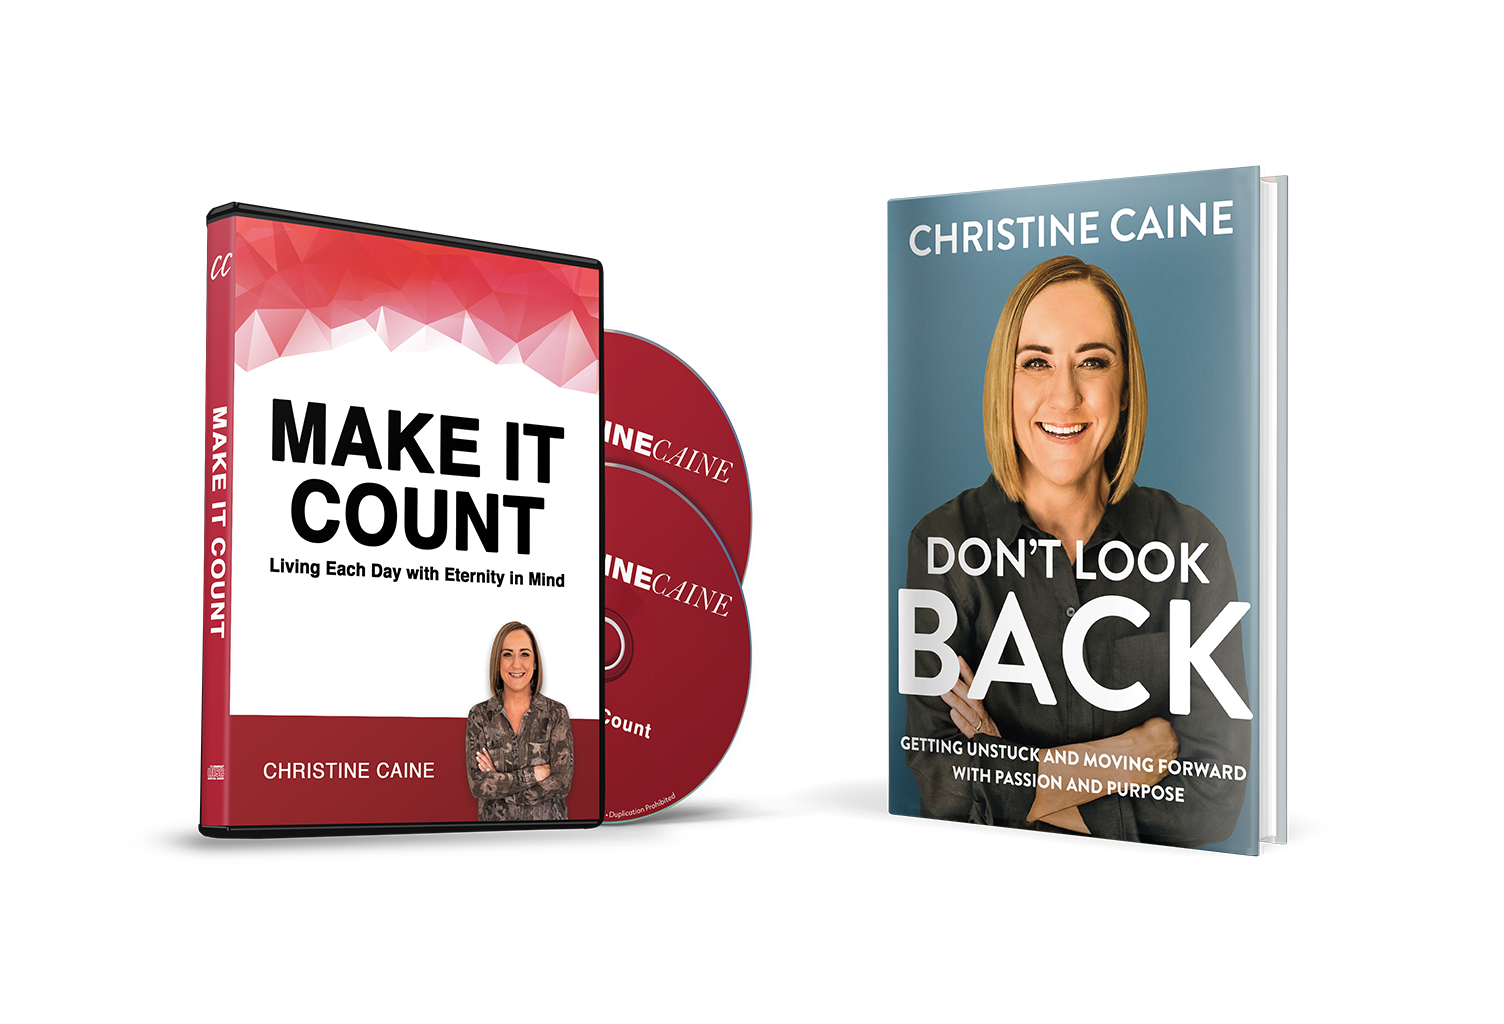 Make It Count + Don't Look Back by Christine Caine from TBN